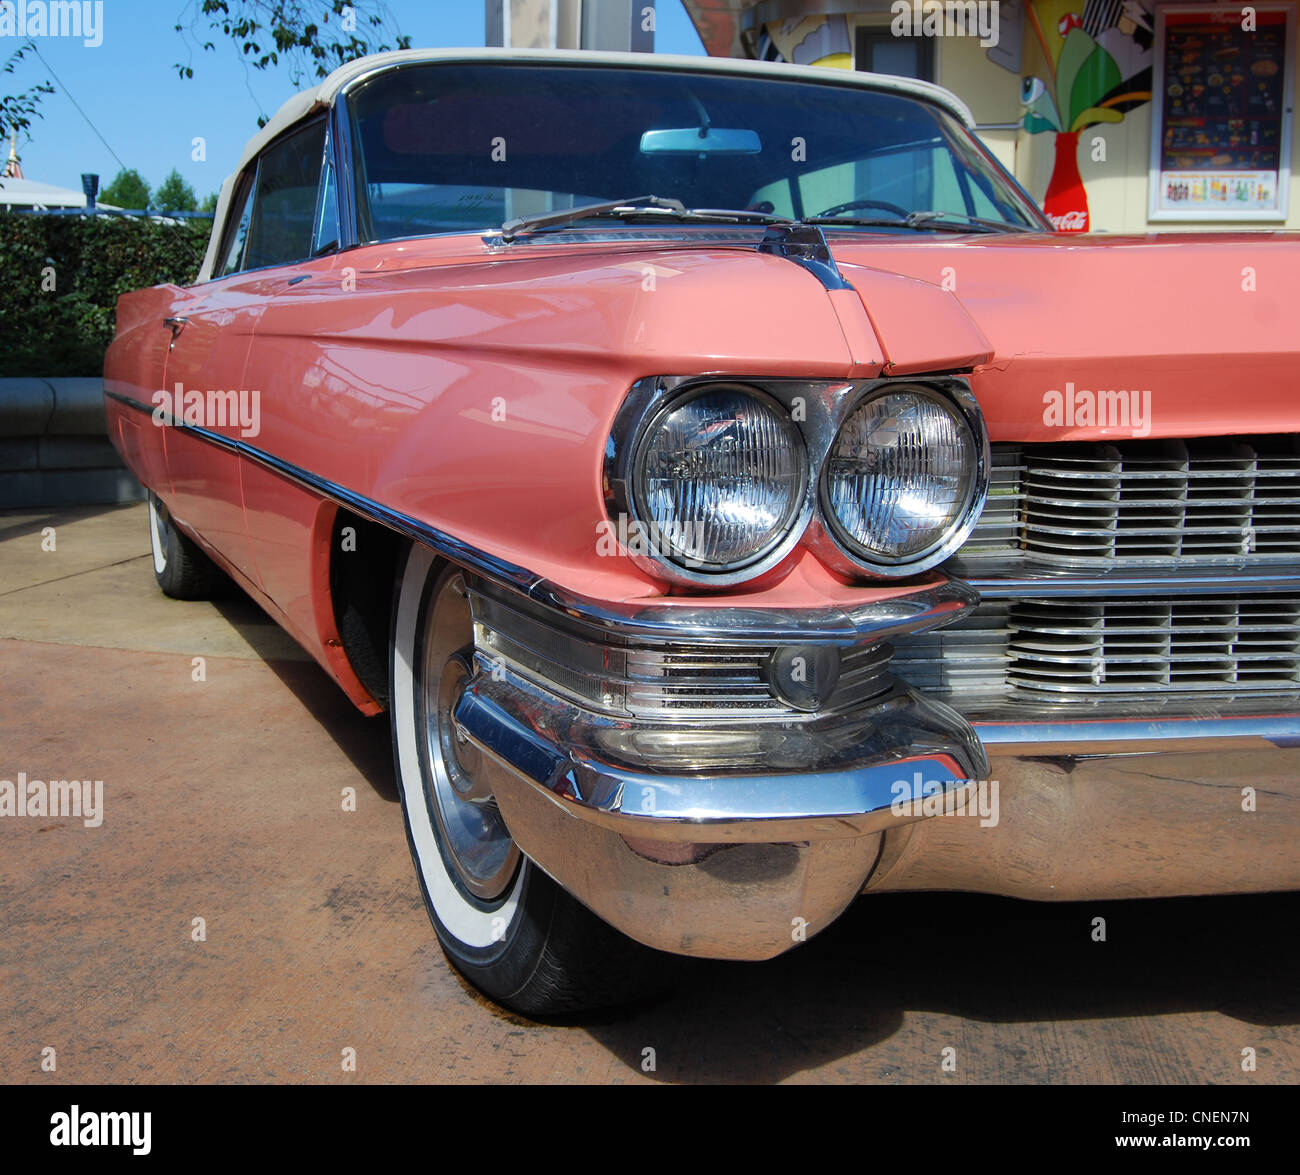 Pink Cadillac 1963 coup de ville number 3145 Stock Photo